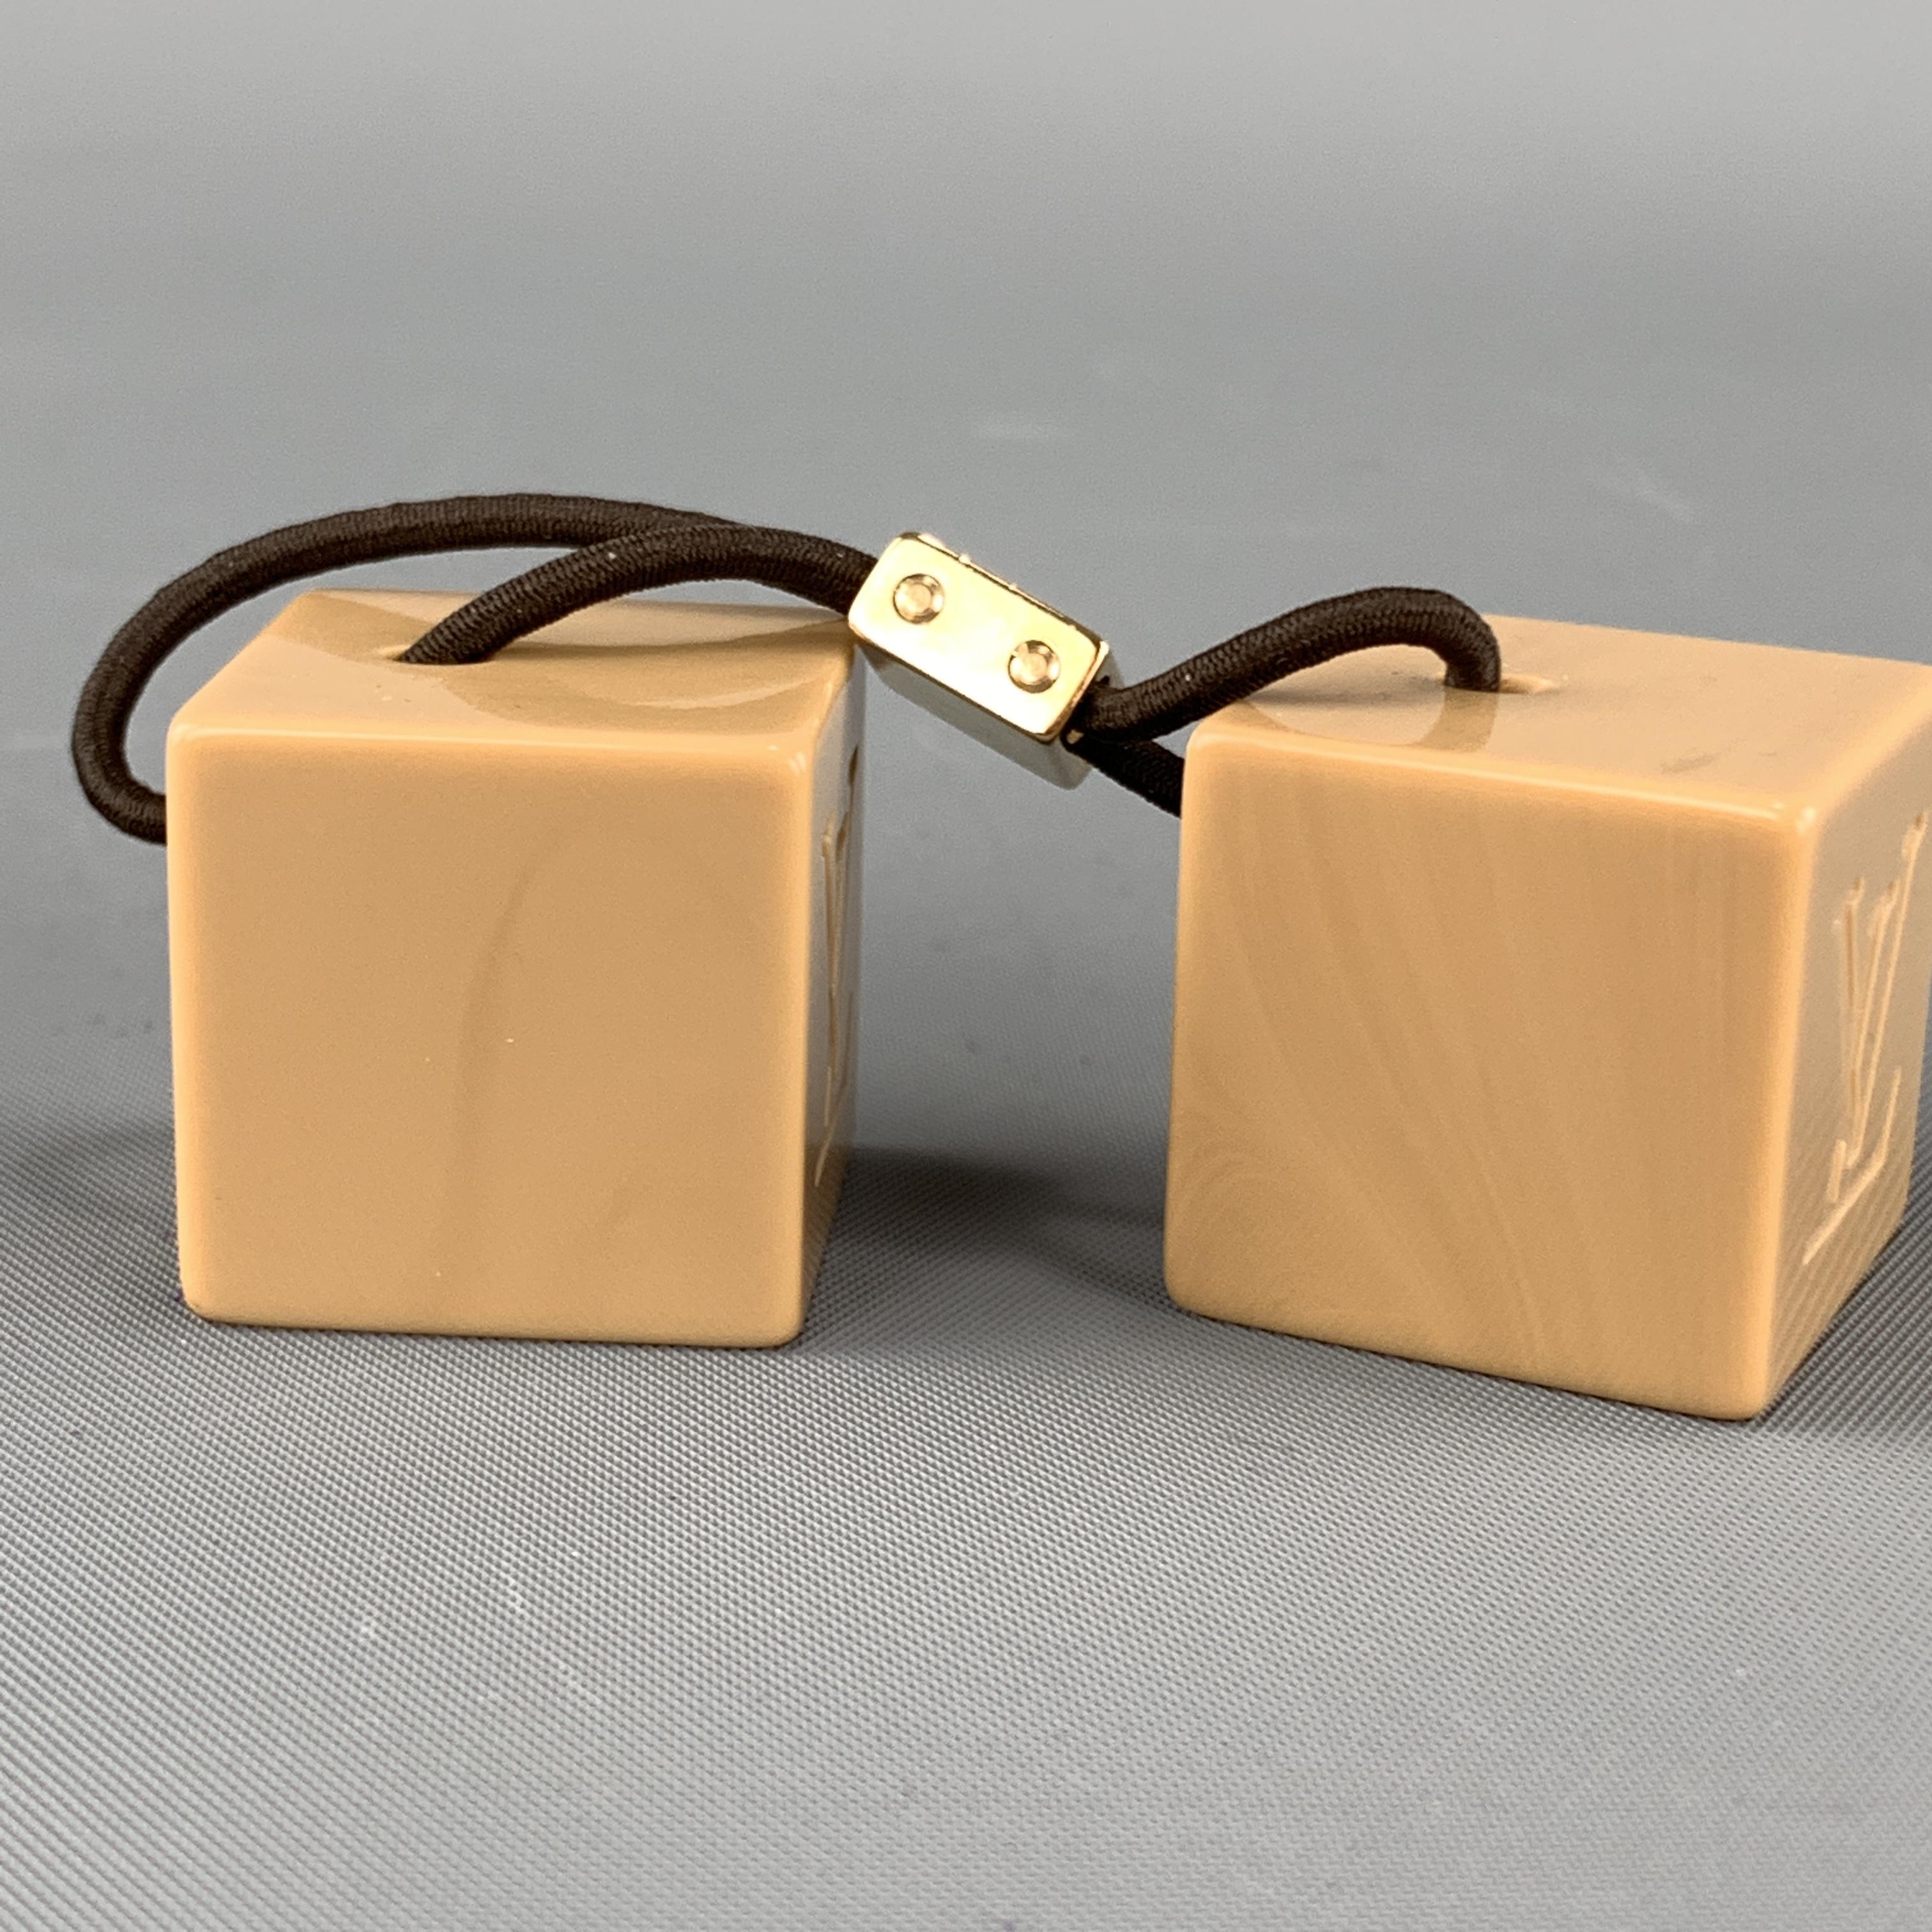 Vintage LOUIS VUITTON hair band comes features a stretch hair tie wit gold tone metal accent and taupe cubes with LV monogram logo. With ust bag.

Excellent Pre-Owned Condition.

Cube: 2.5 cm.